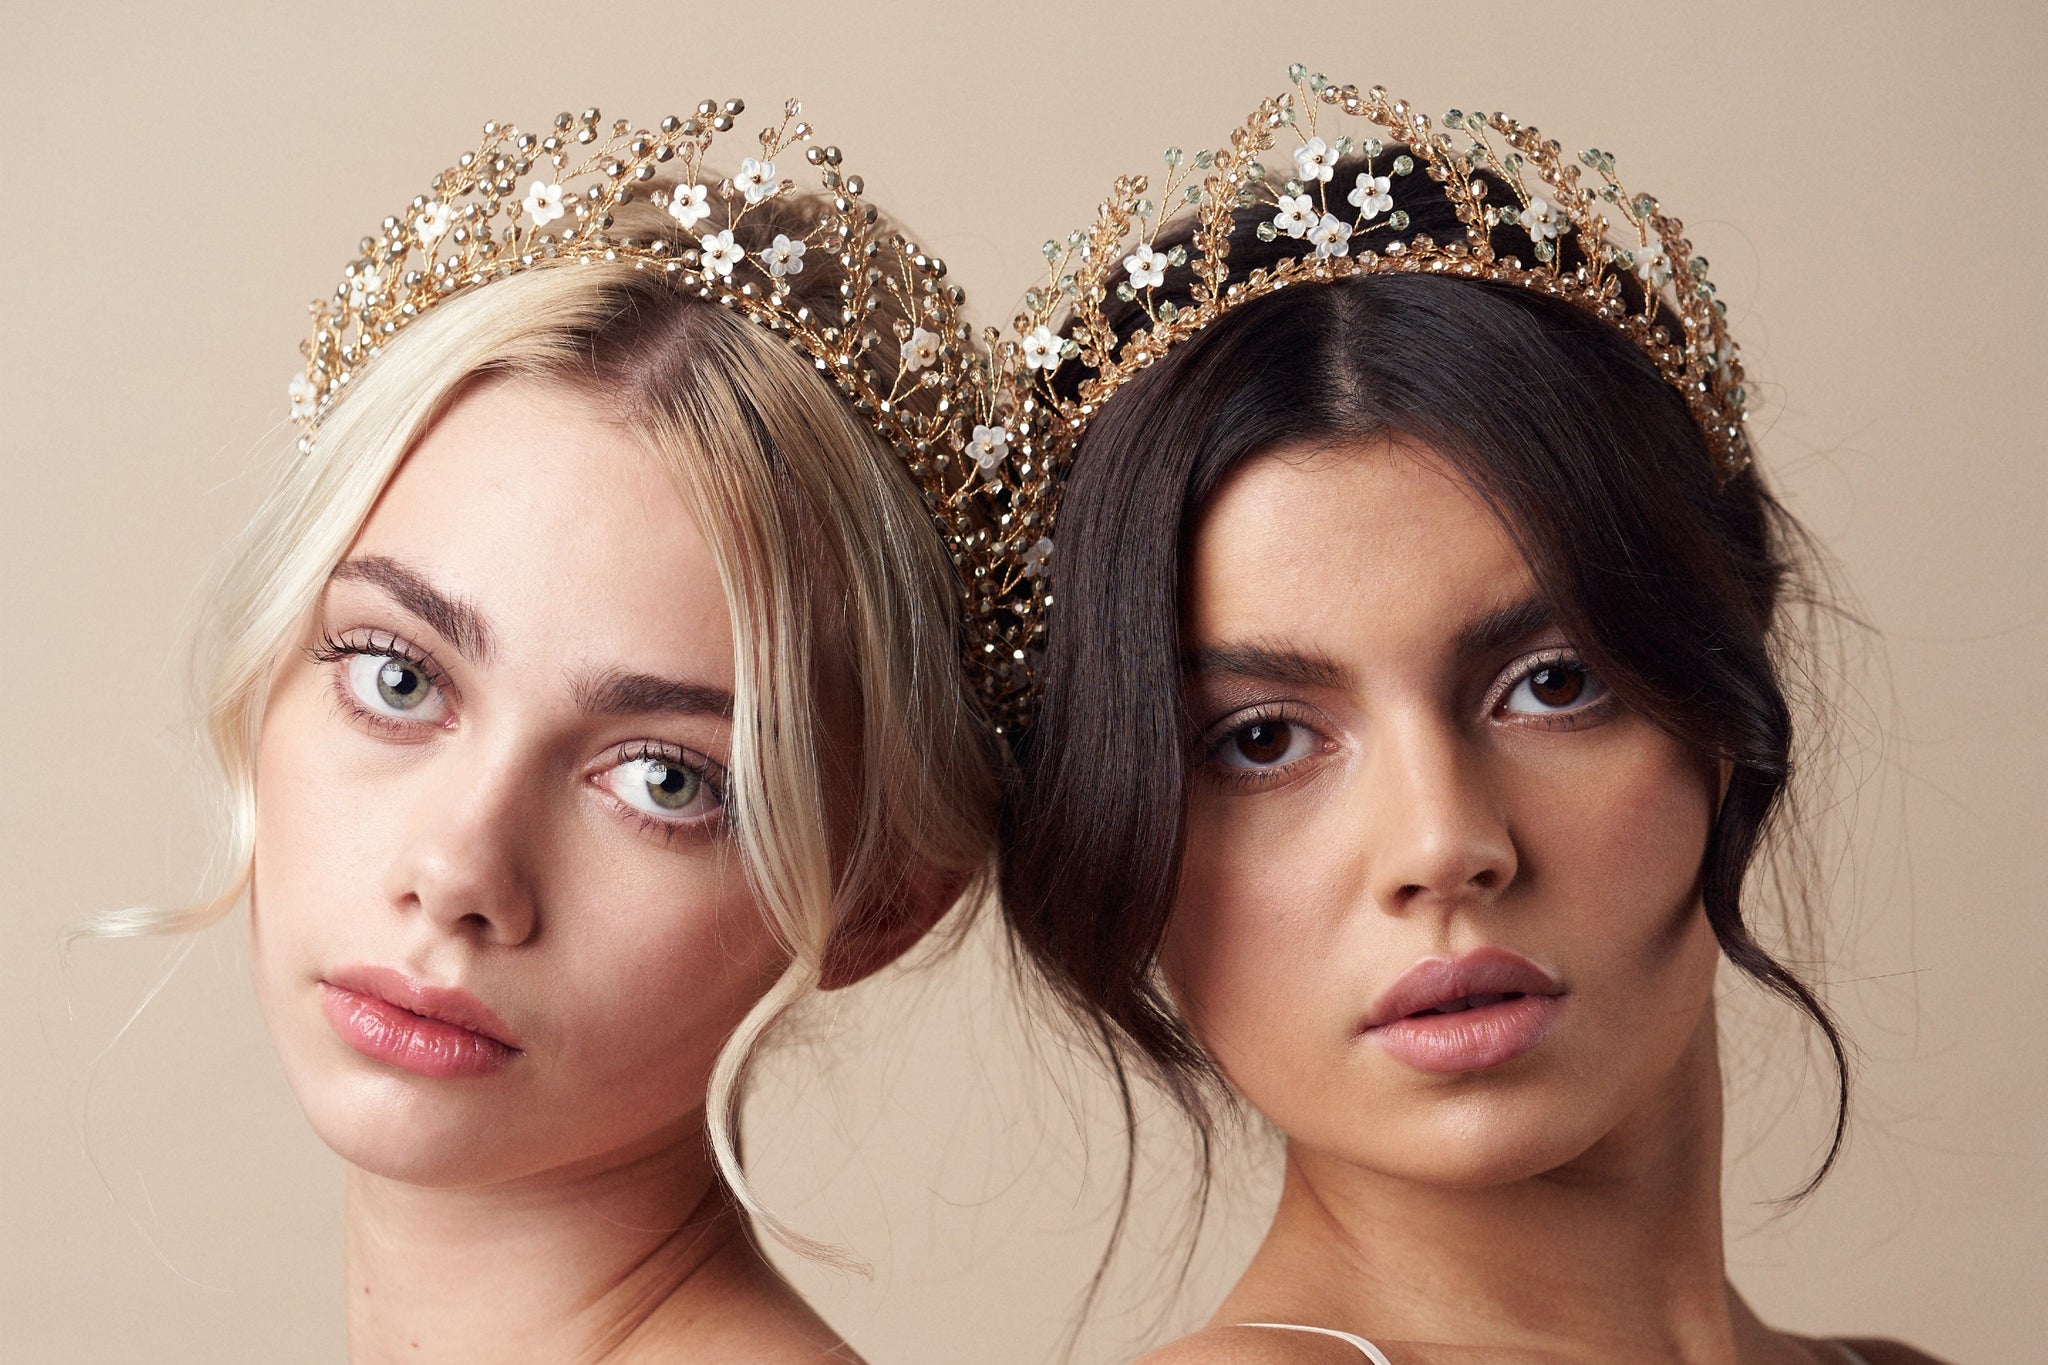 Large and small versions of the Coraline gold crowns worn by models